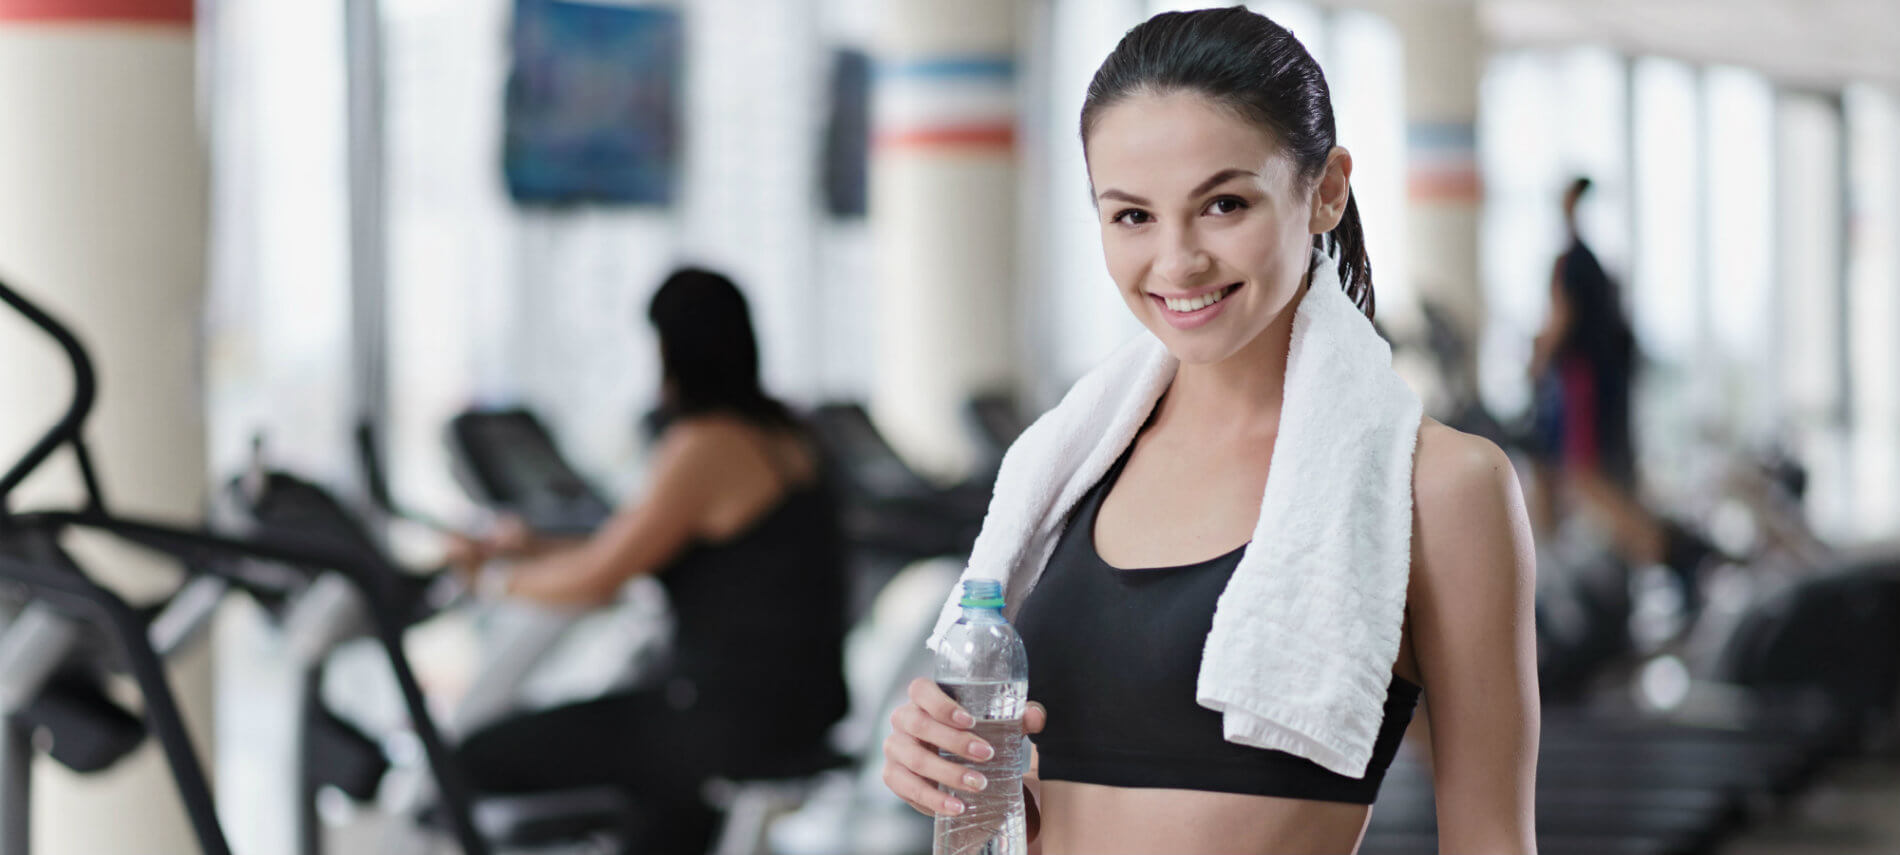 A woman in the gym with a towl around her shoulders pausing to take a drink.